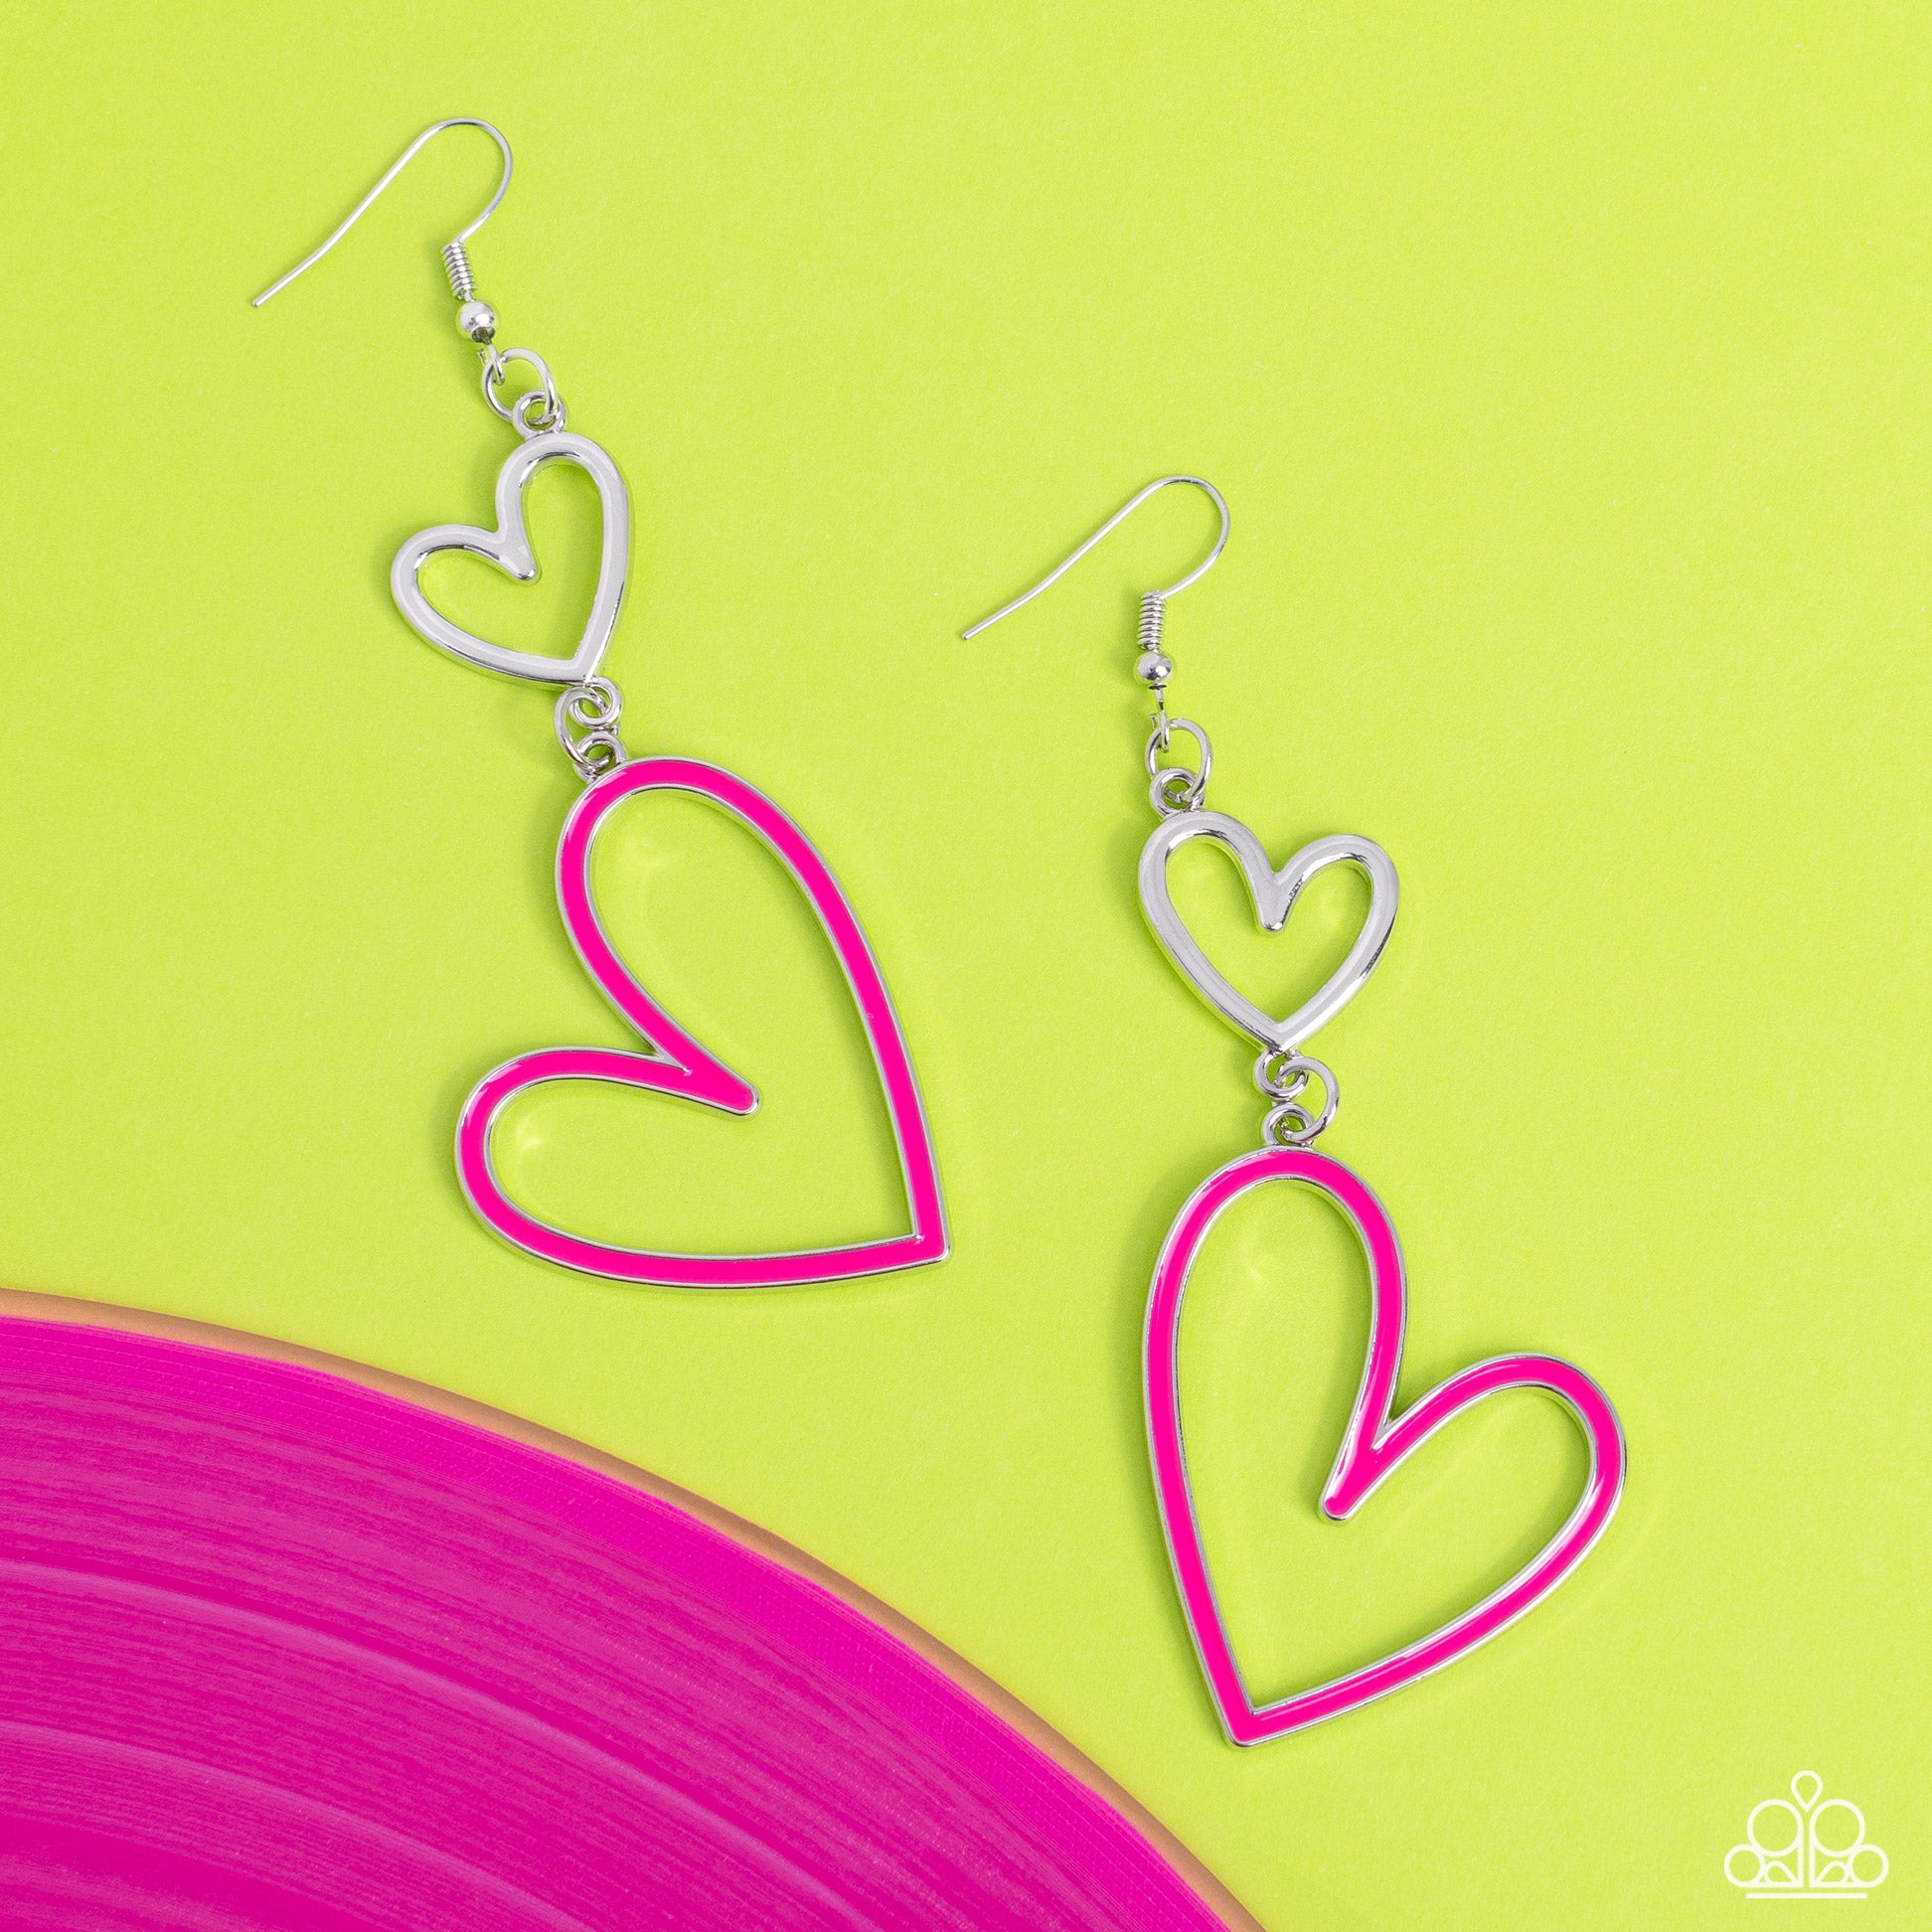 Pristine Pizzazz Pink Heart Earring - Paparazzi Accessories  Dangling from an abstract silver heart frame, another heart frame, this time an oversized one, features a border of Pink Peacock paint, creating an attention-grabbing romantic statement below the ear. Earring attaches to a standard fishhook fitting.  Sold as one pair of earrings.  P5WH-PKXX-275XX